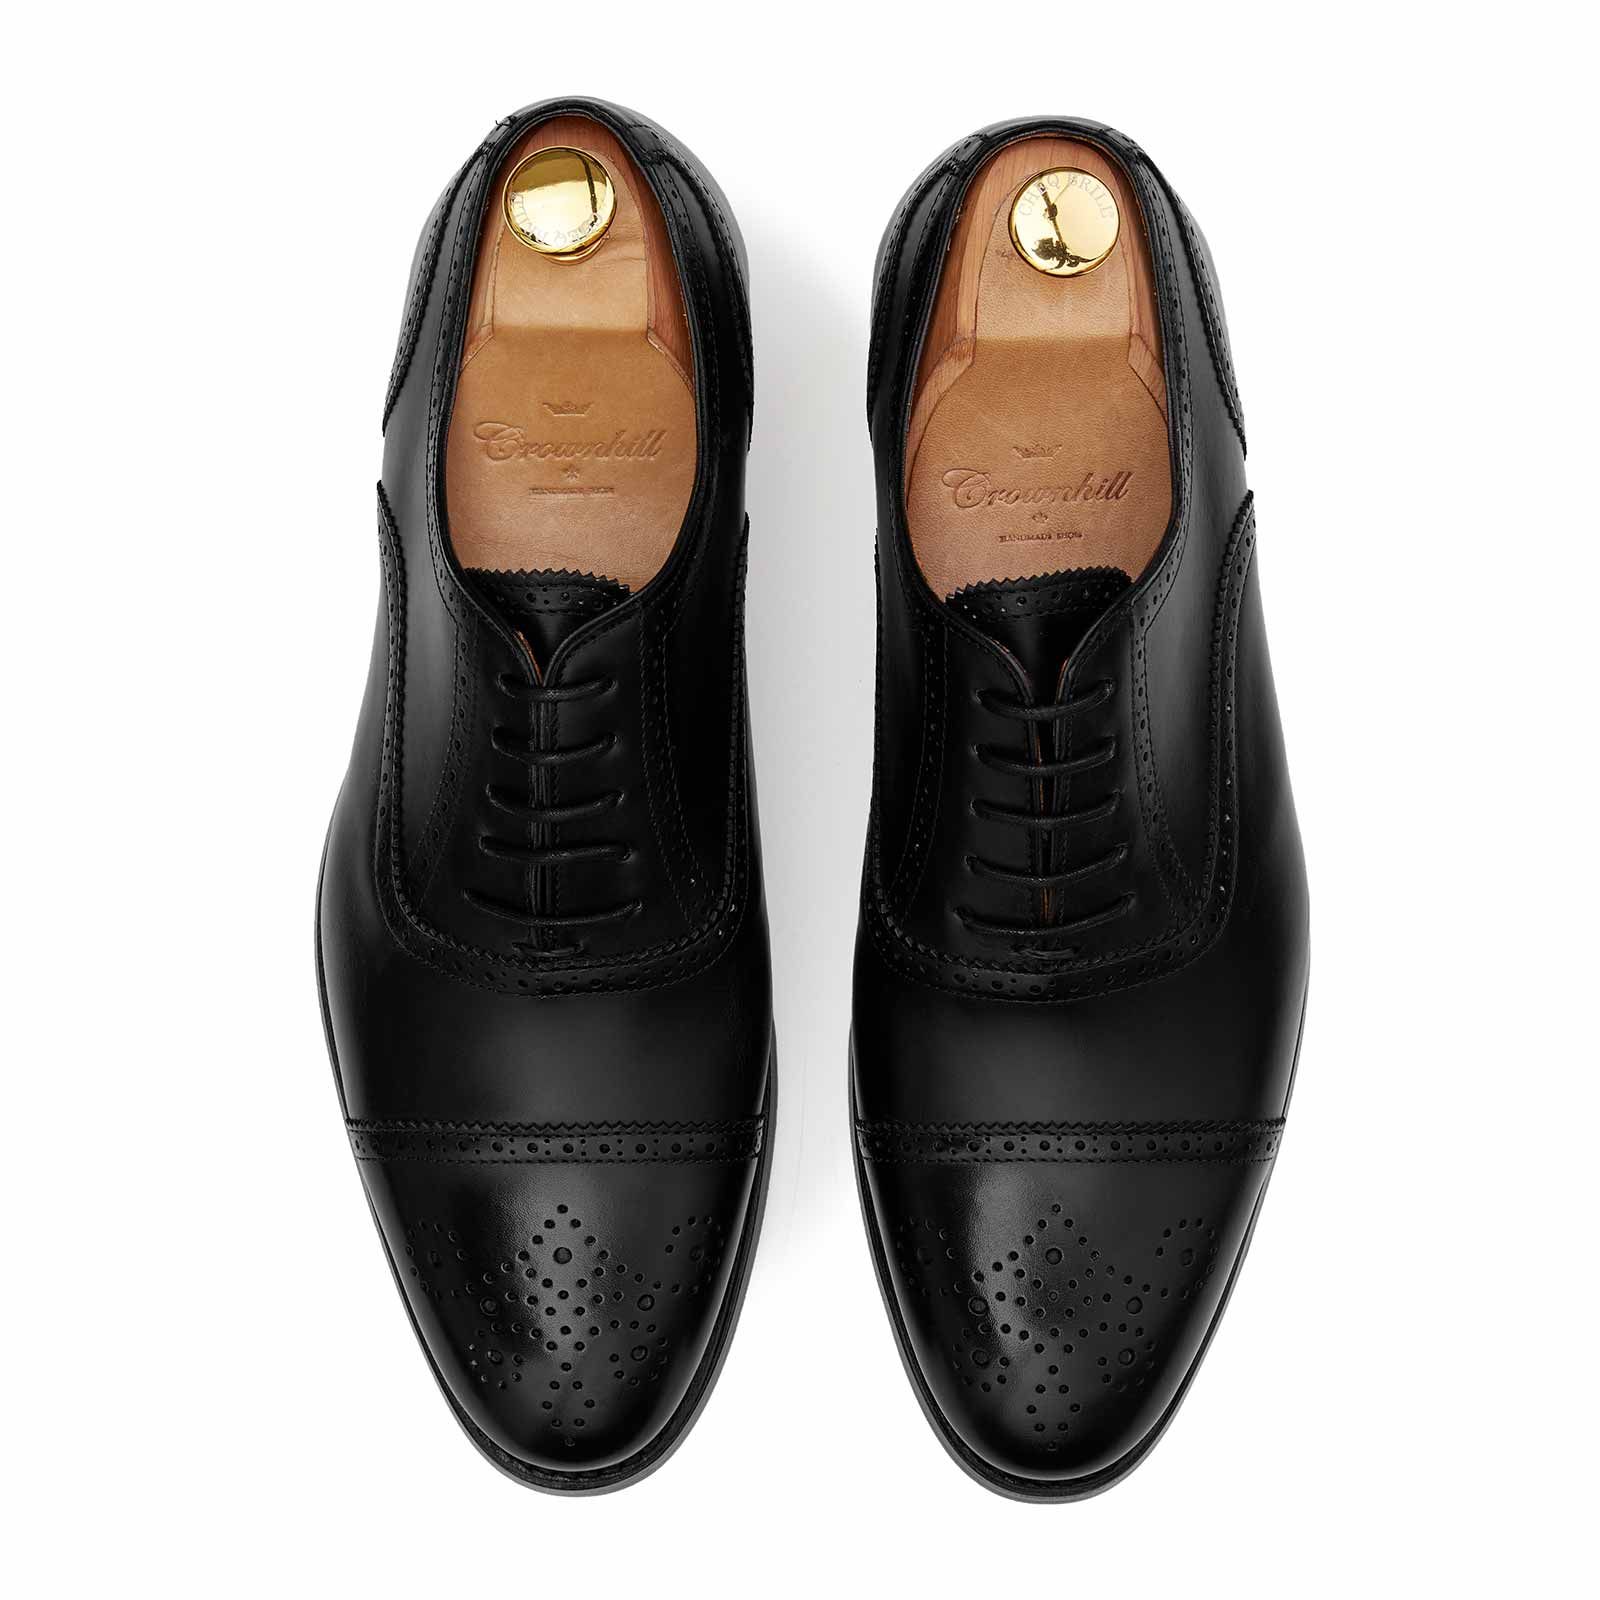 black brogue loafers